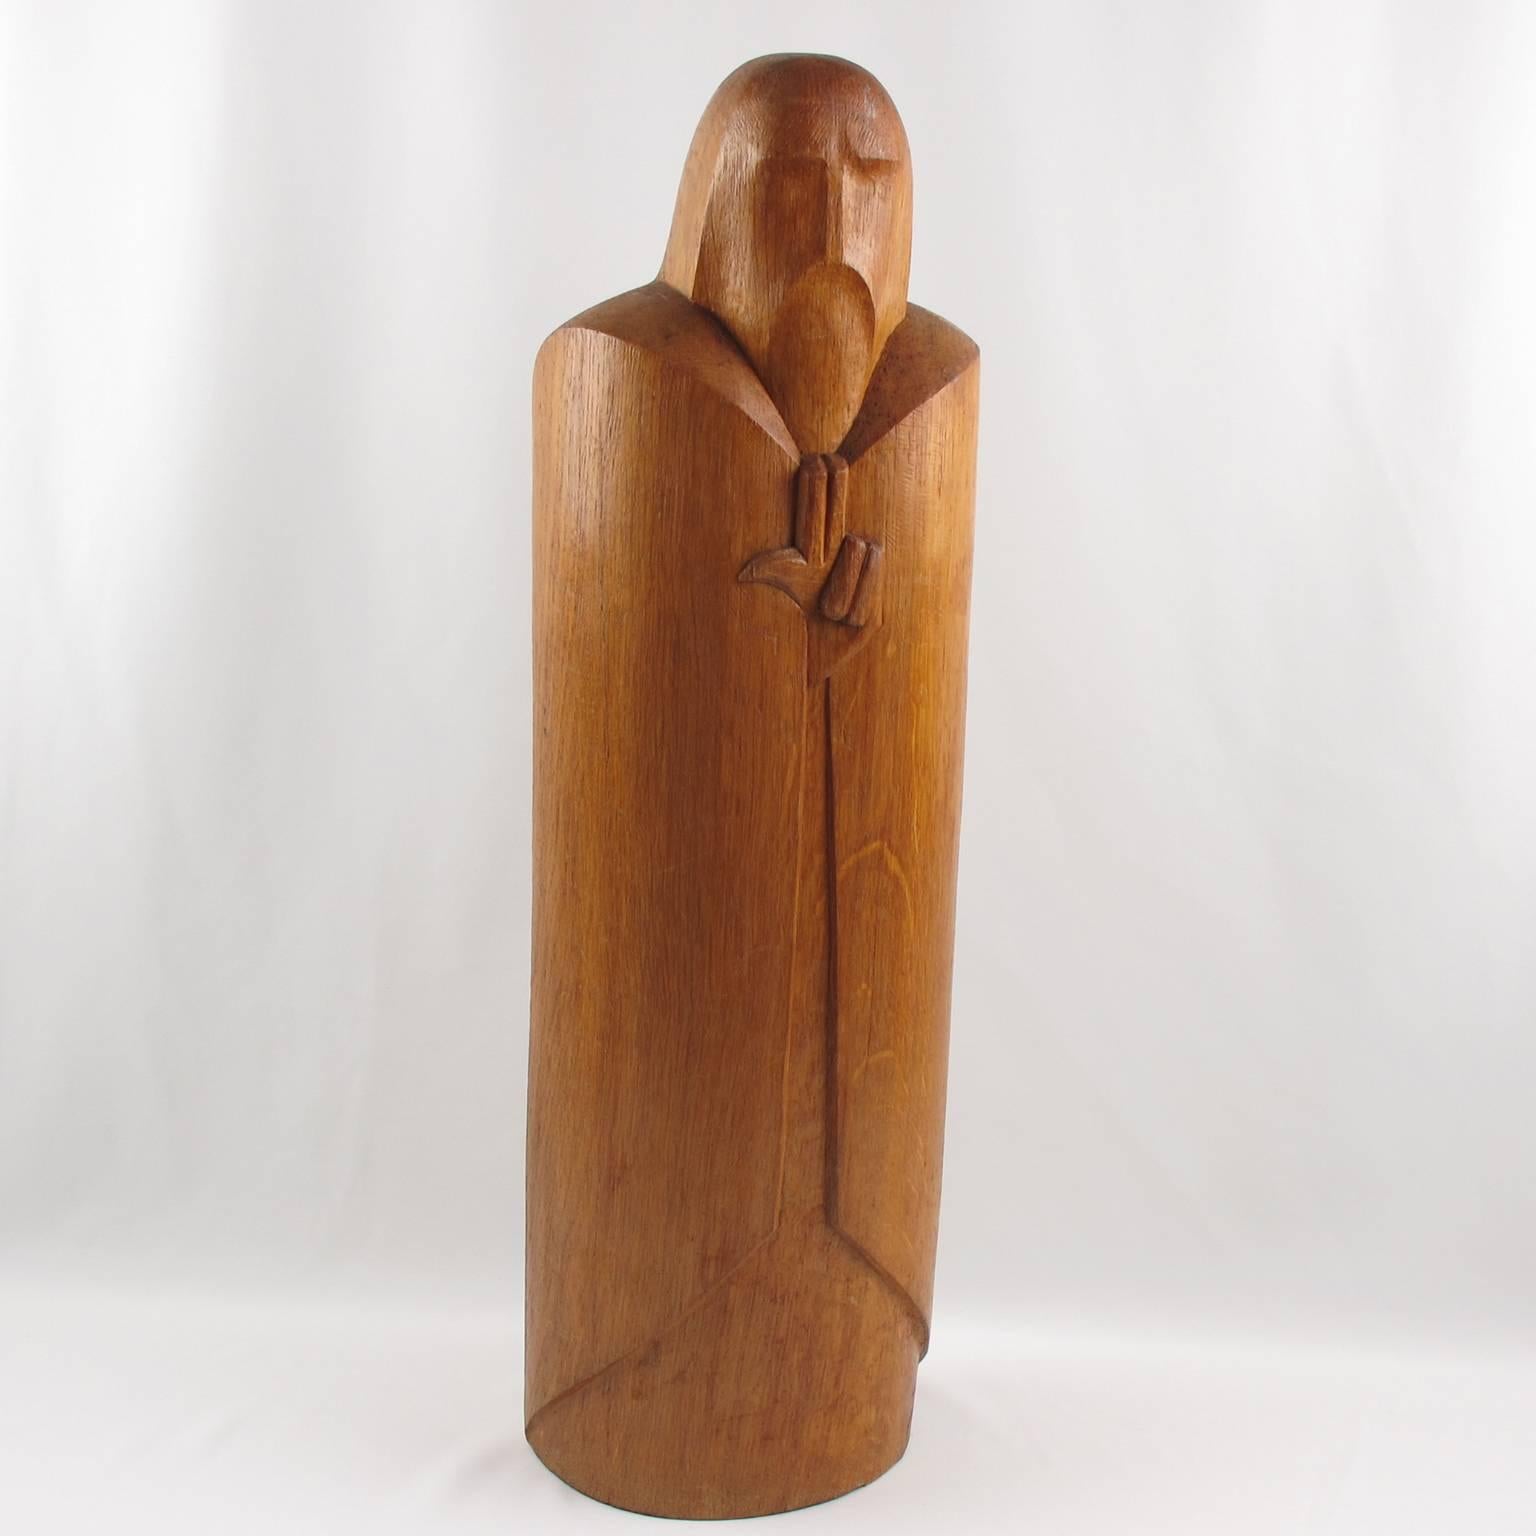 Extremely rare original wood sculpture by Wenzel Profant (1913-1989). Absolute minimalist carved shape featuring a monk or a knight, with Profant engraved monogram signature on bottom side. Luxembourg, circa 1950s. Excellent vintage